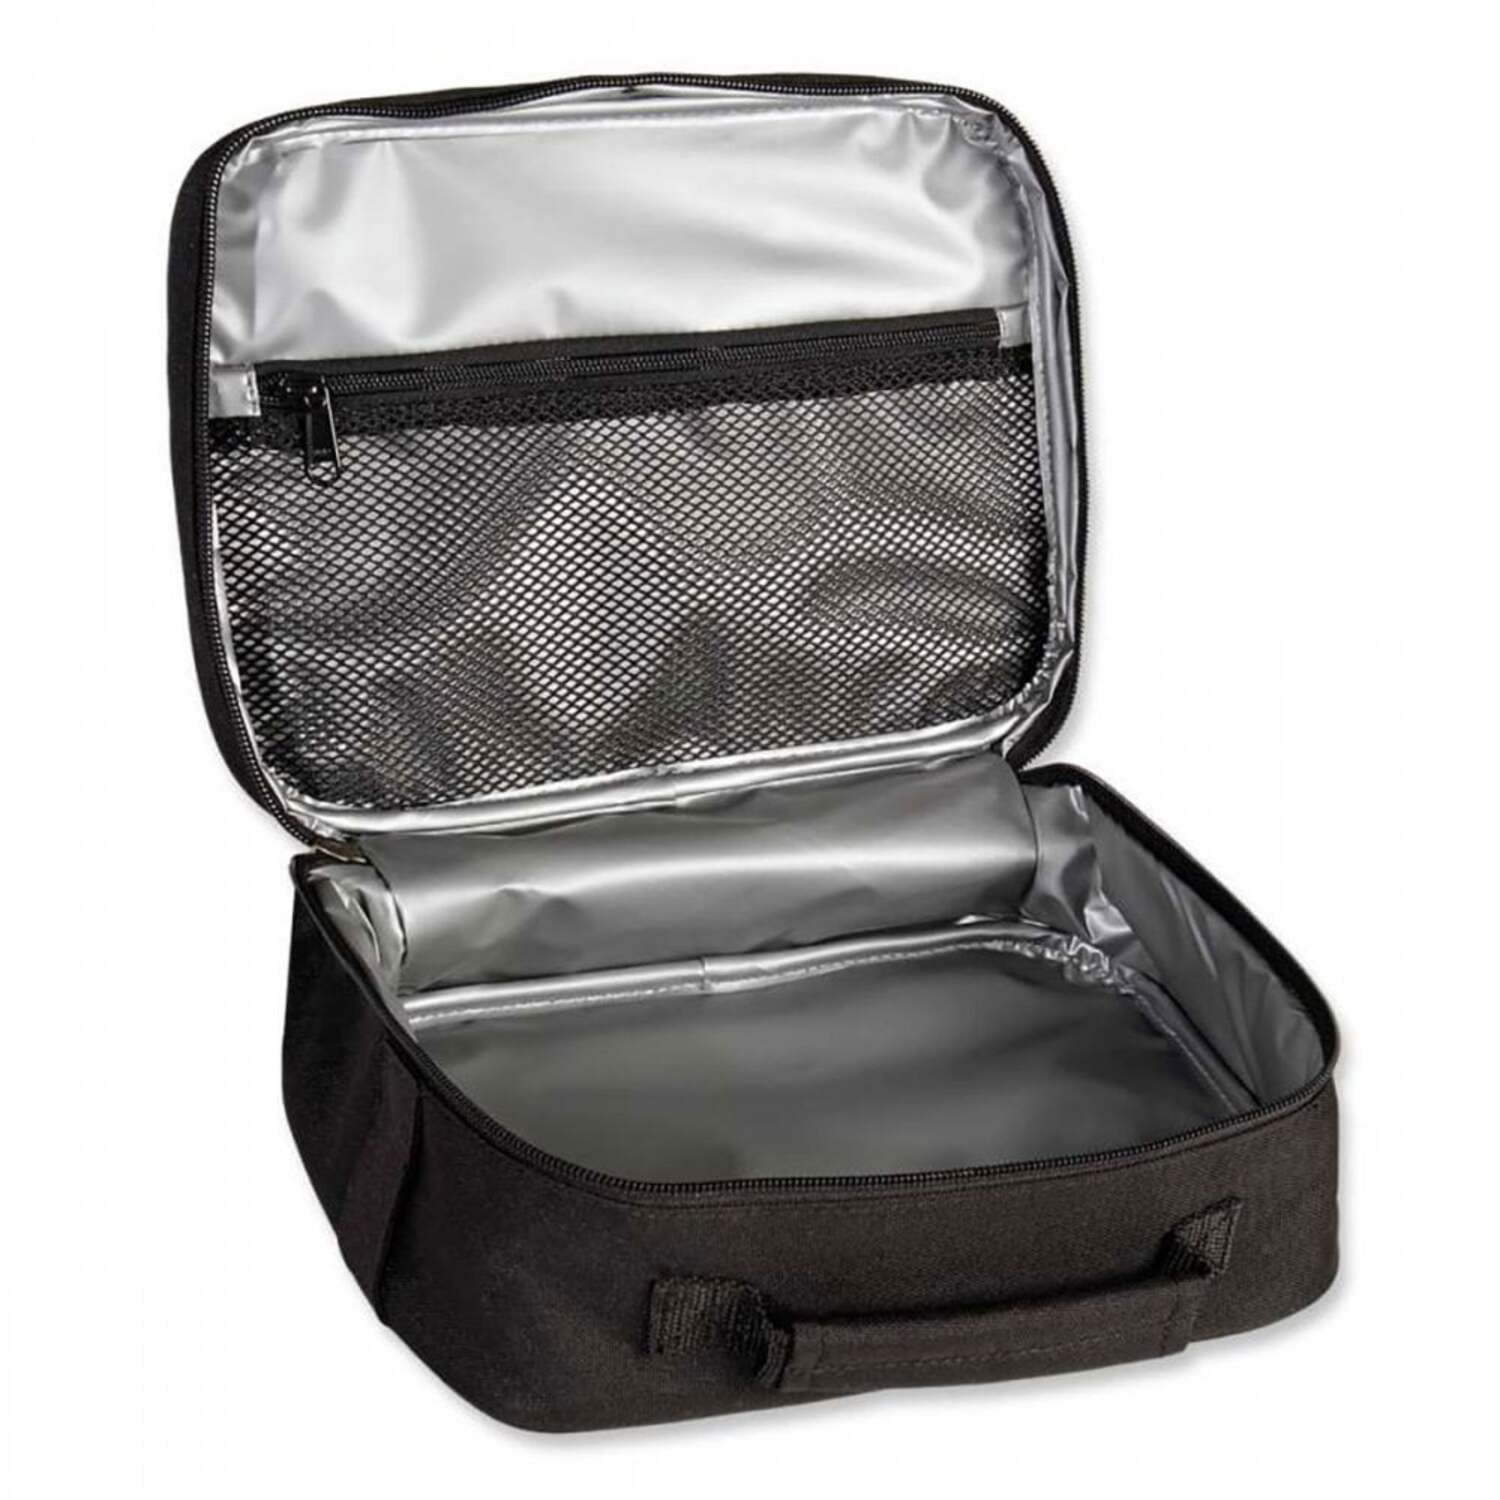 How to keep a cooler bag cold?